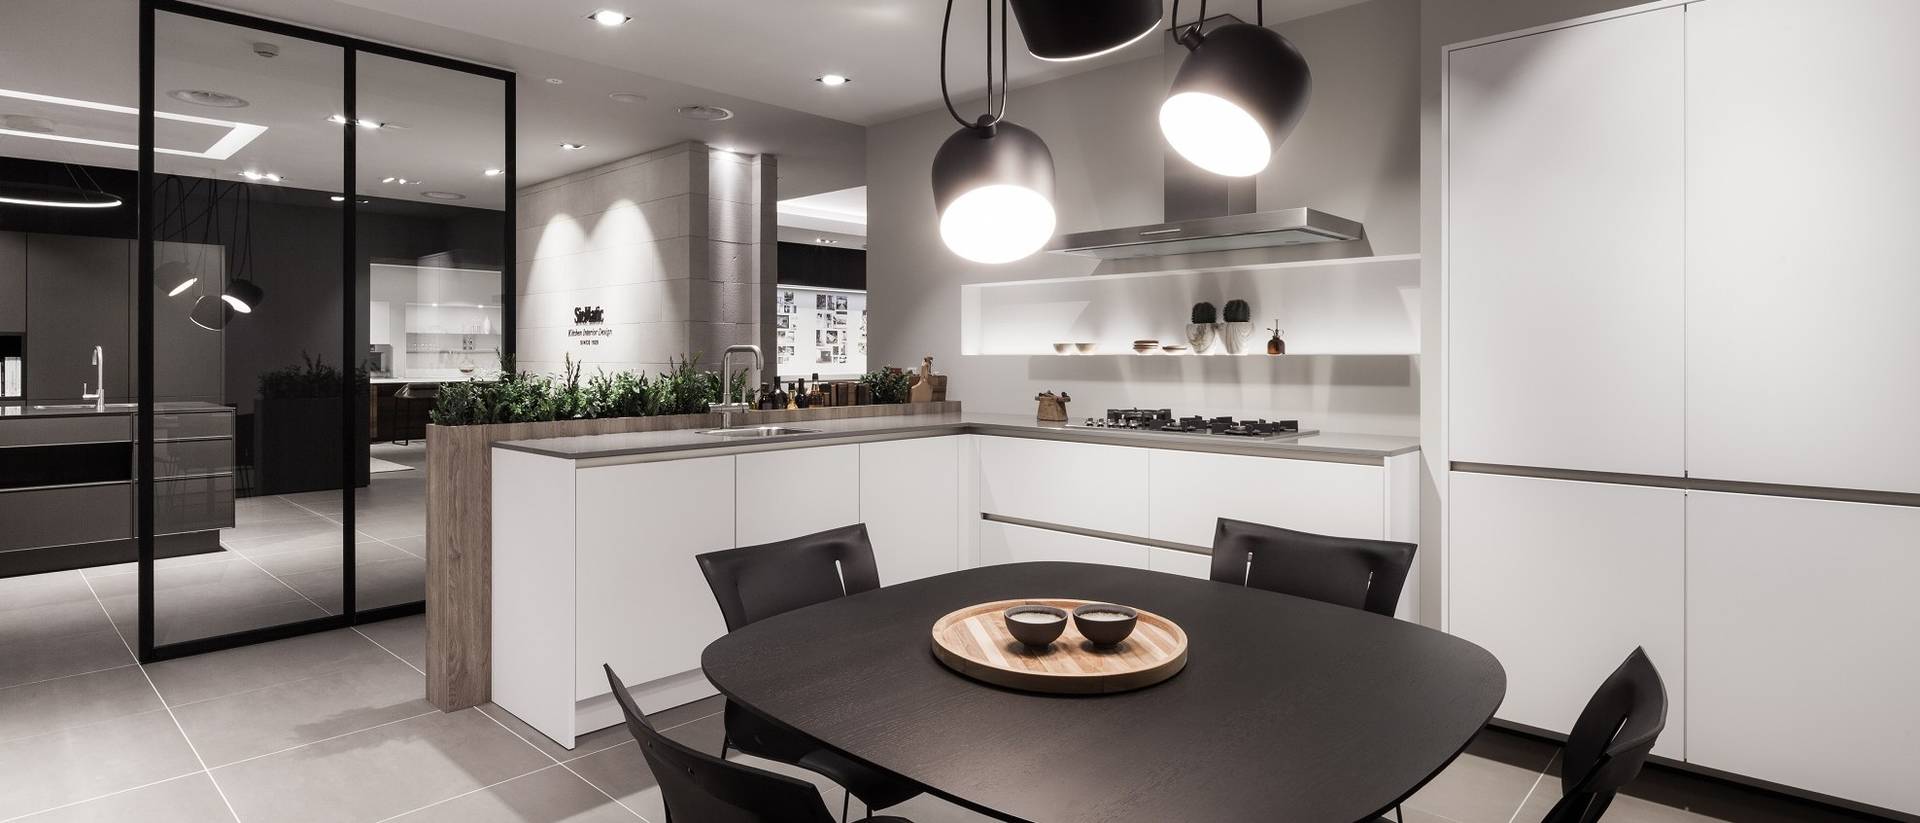 SieMatic kitchen showrooms: Find inspiration in individualized SieMatic kitchen design